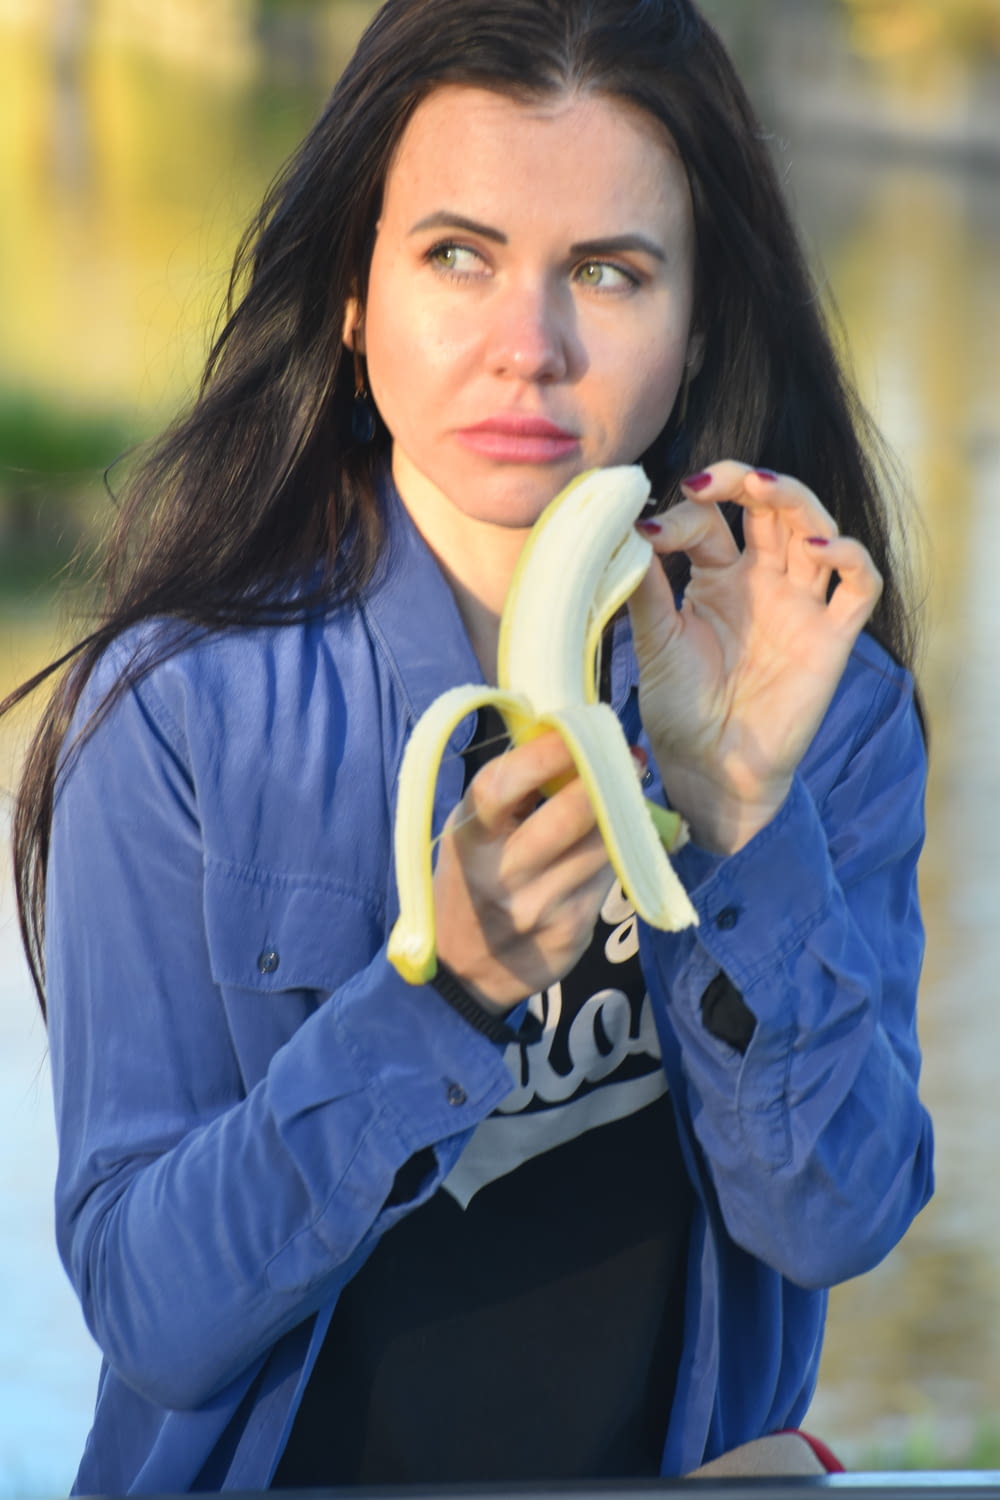 a woman holding a banana up to her face